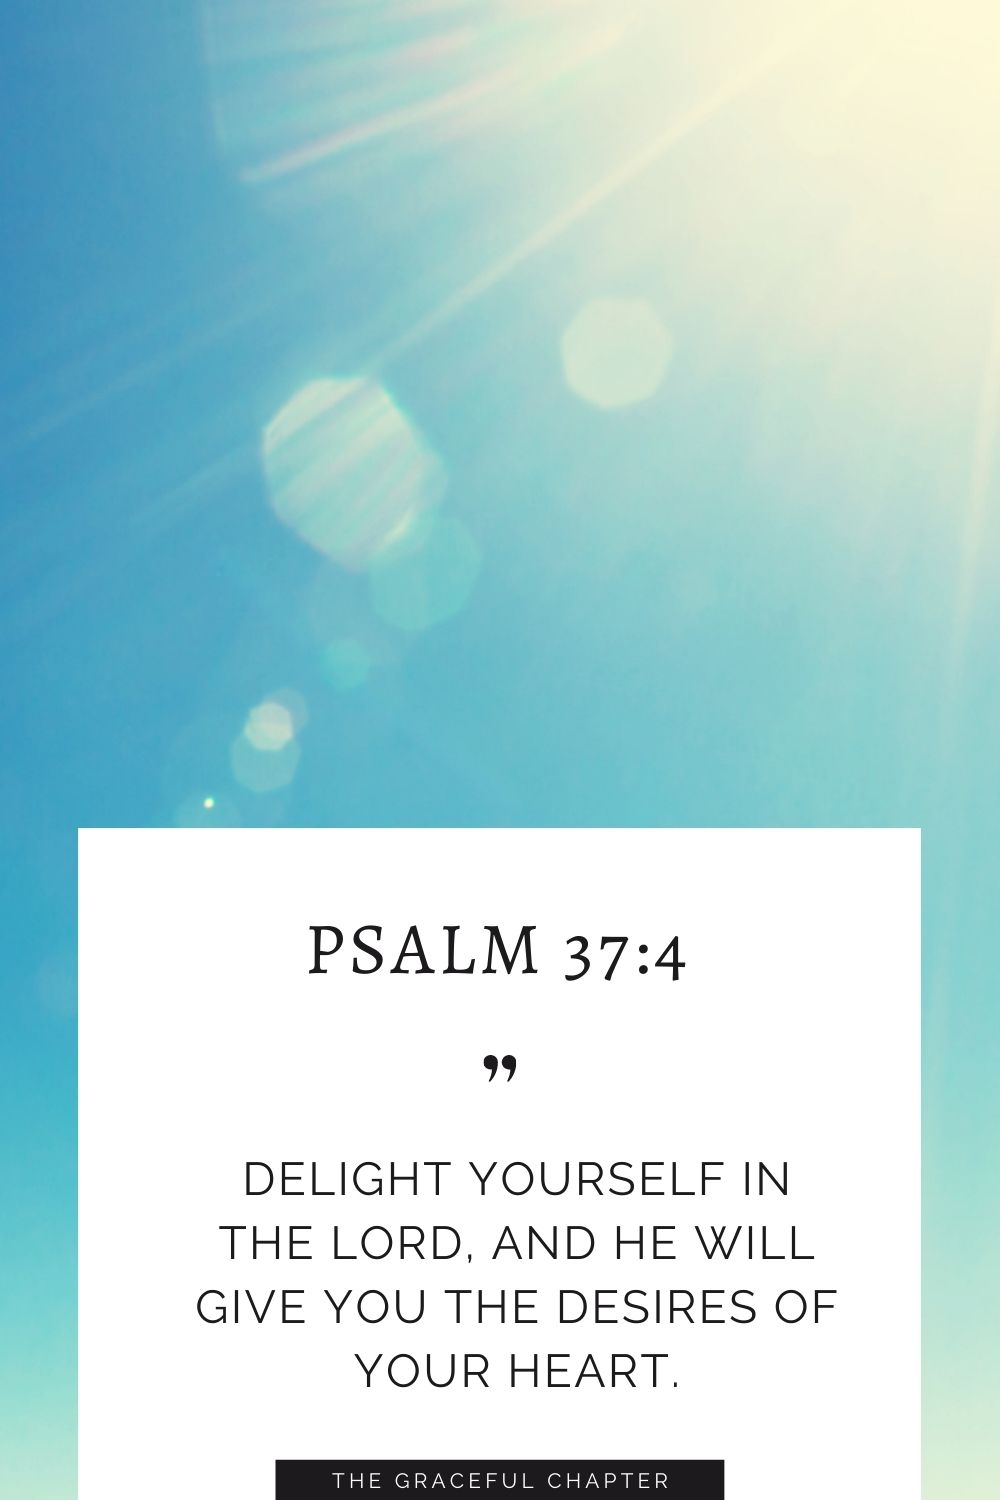 Delight yourself in the Lord, and he will give you the desires of your heart. Psalm 37:4